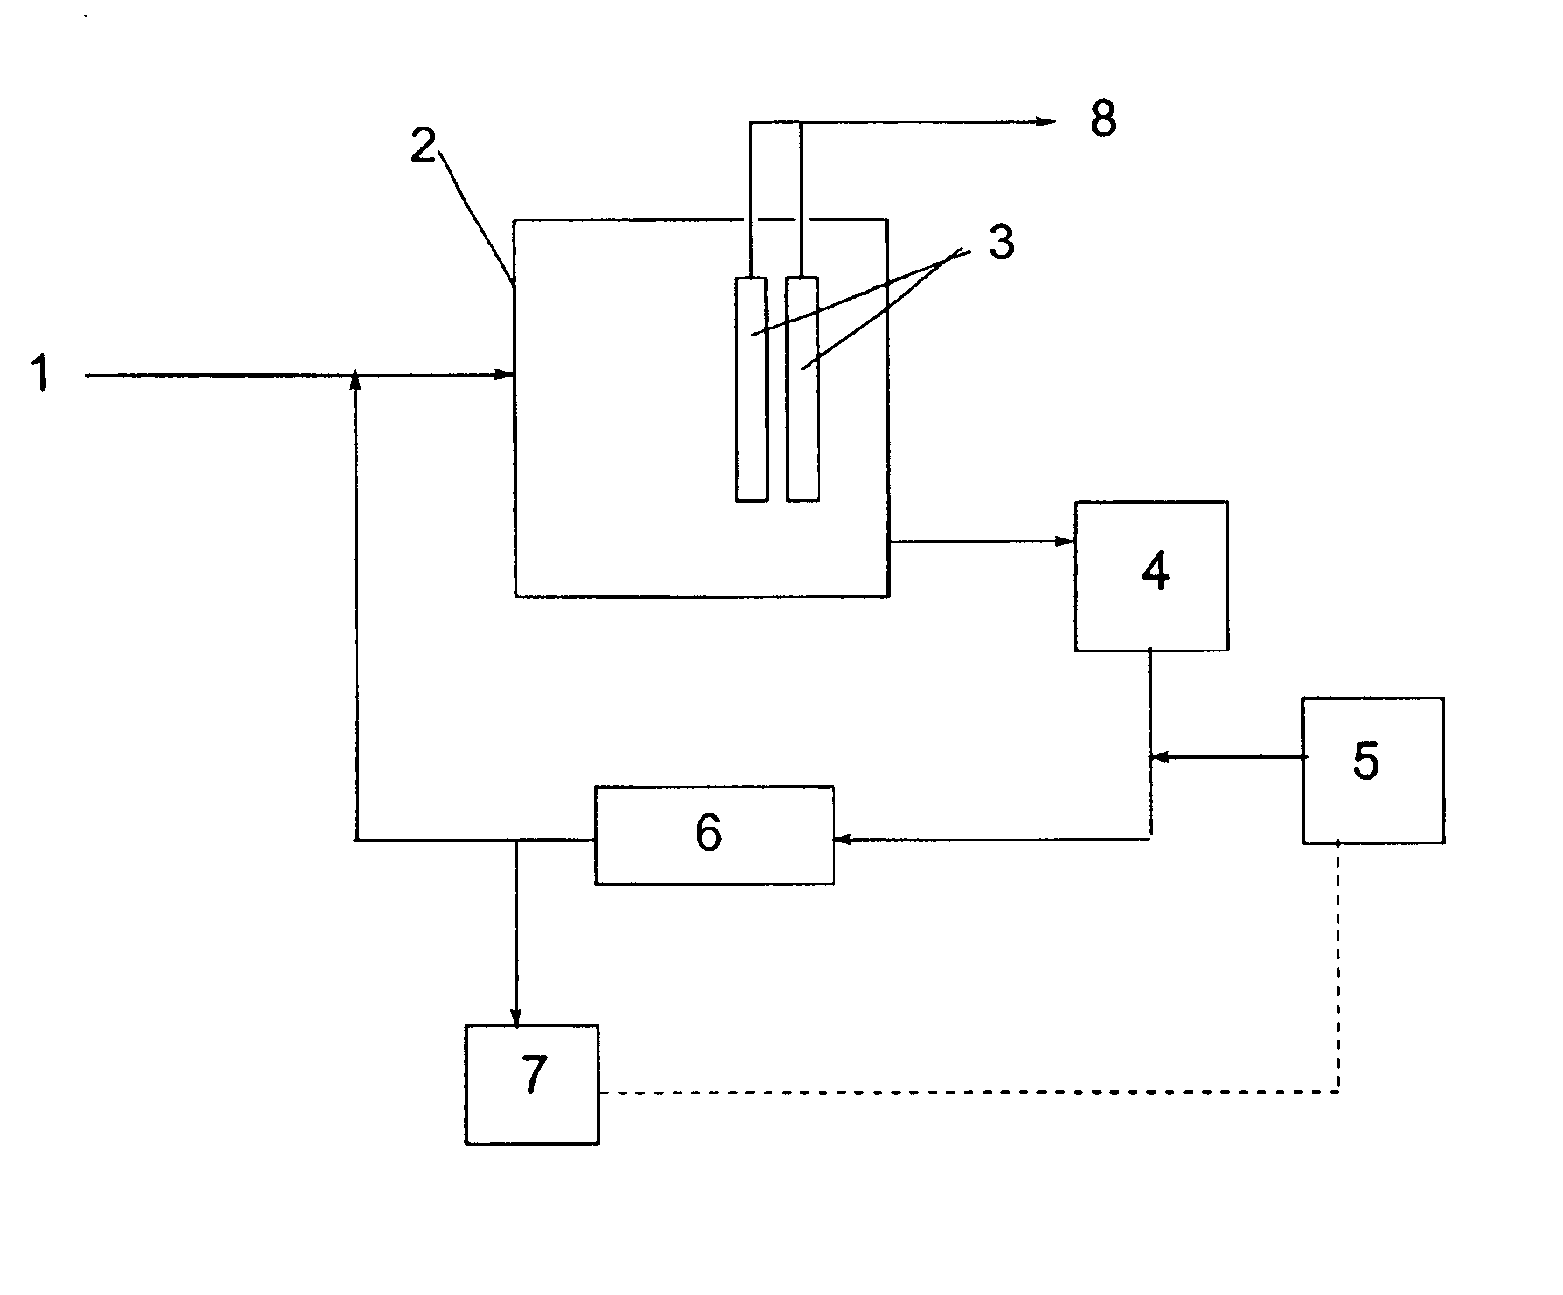 Method of using high molecular weight water soluble polymers in membrane bioreactor systems